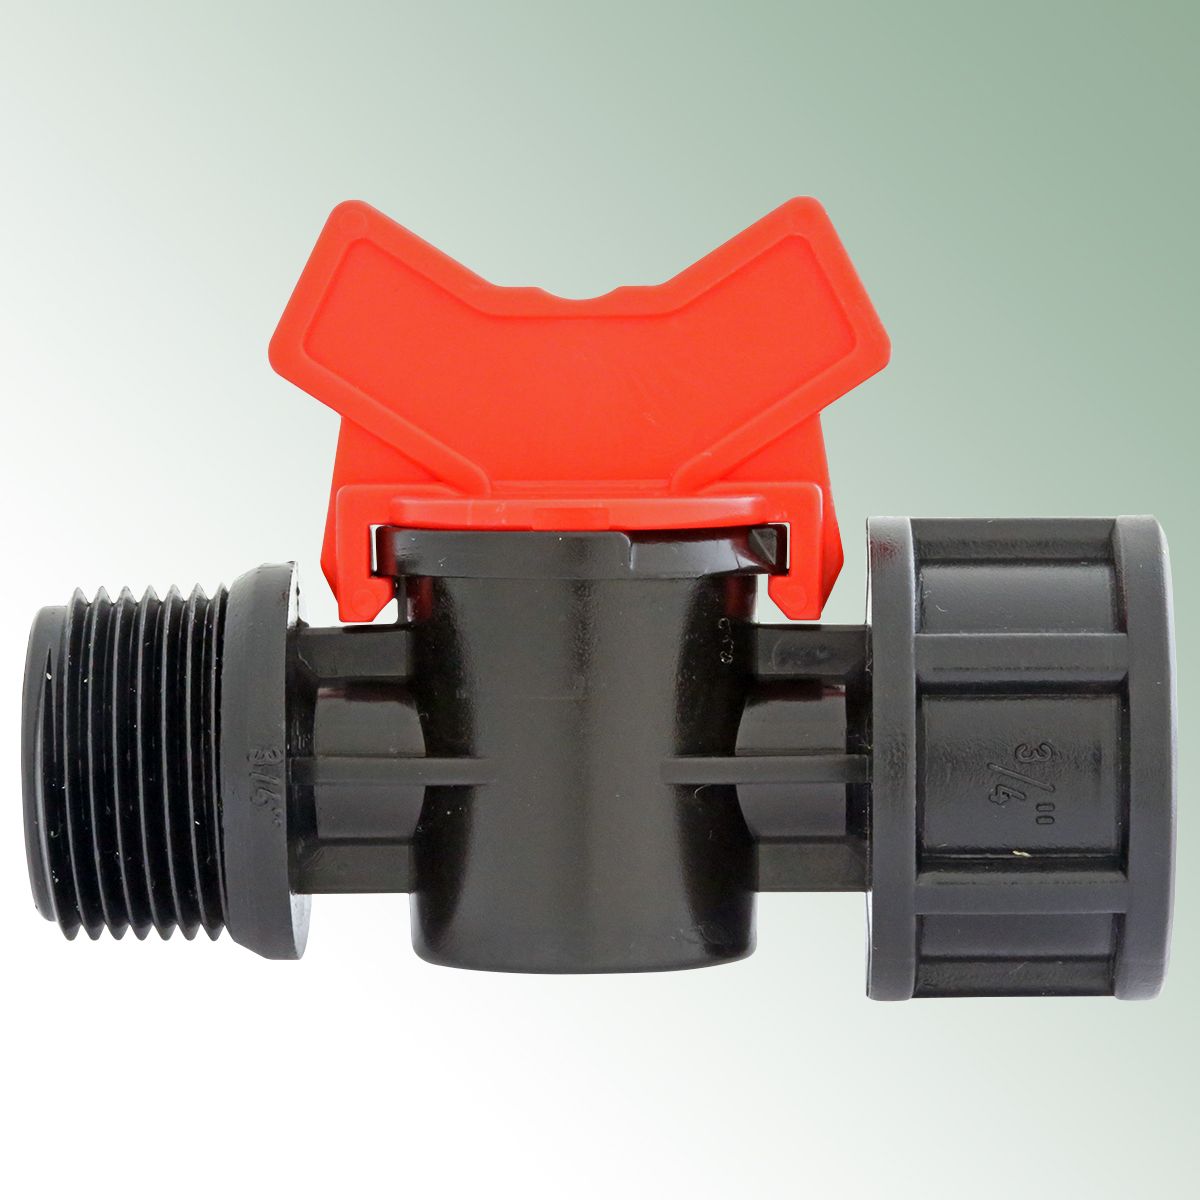 Plastic In-line Valve (up to 4 bar), 3/4Male x 3/4Female Thread, for Pipe